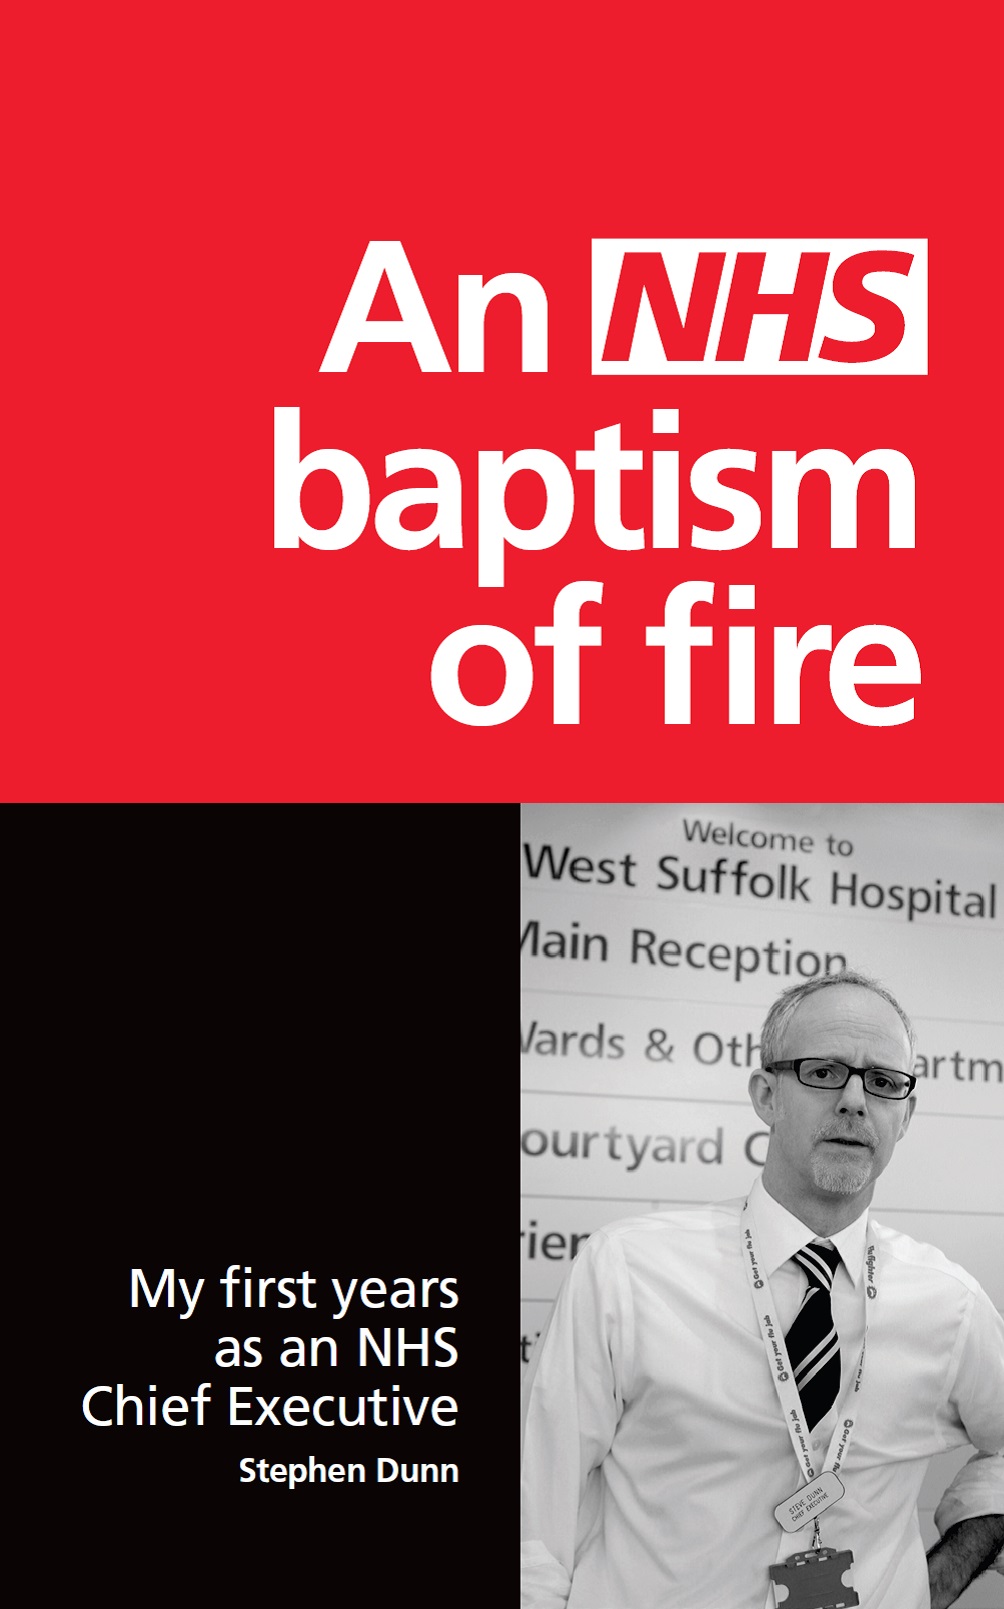 An NHS baptism of fire: My first years as an NHS Chief Executive - Dr Stephen Dunn's new book